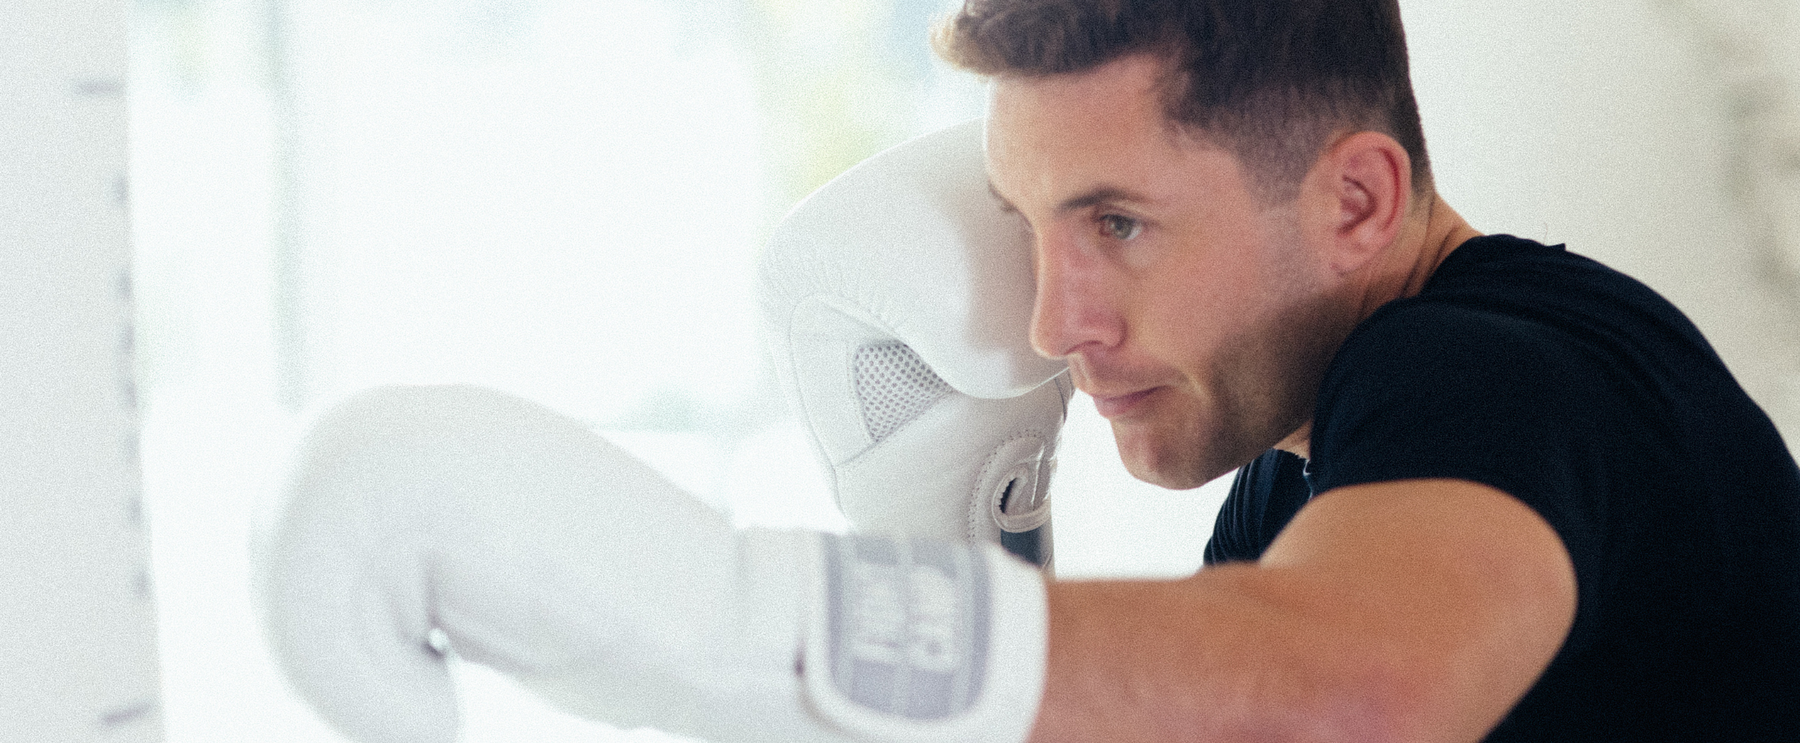 3-Round Beginner Boxing Workout For Men